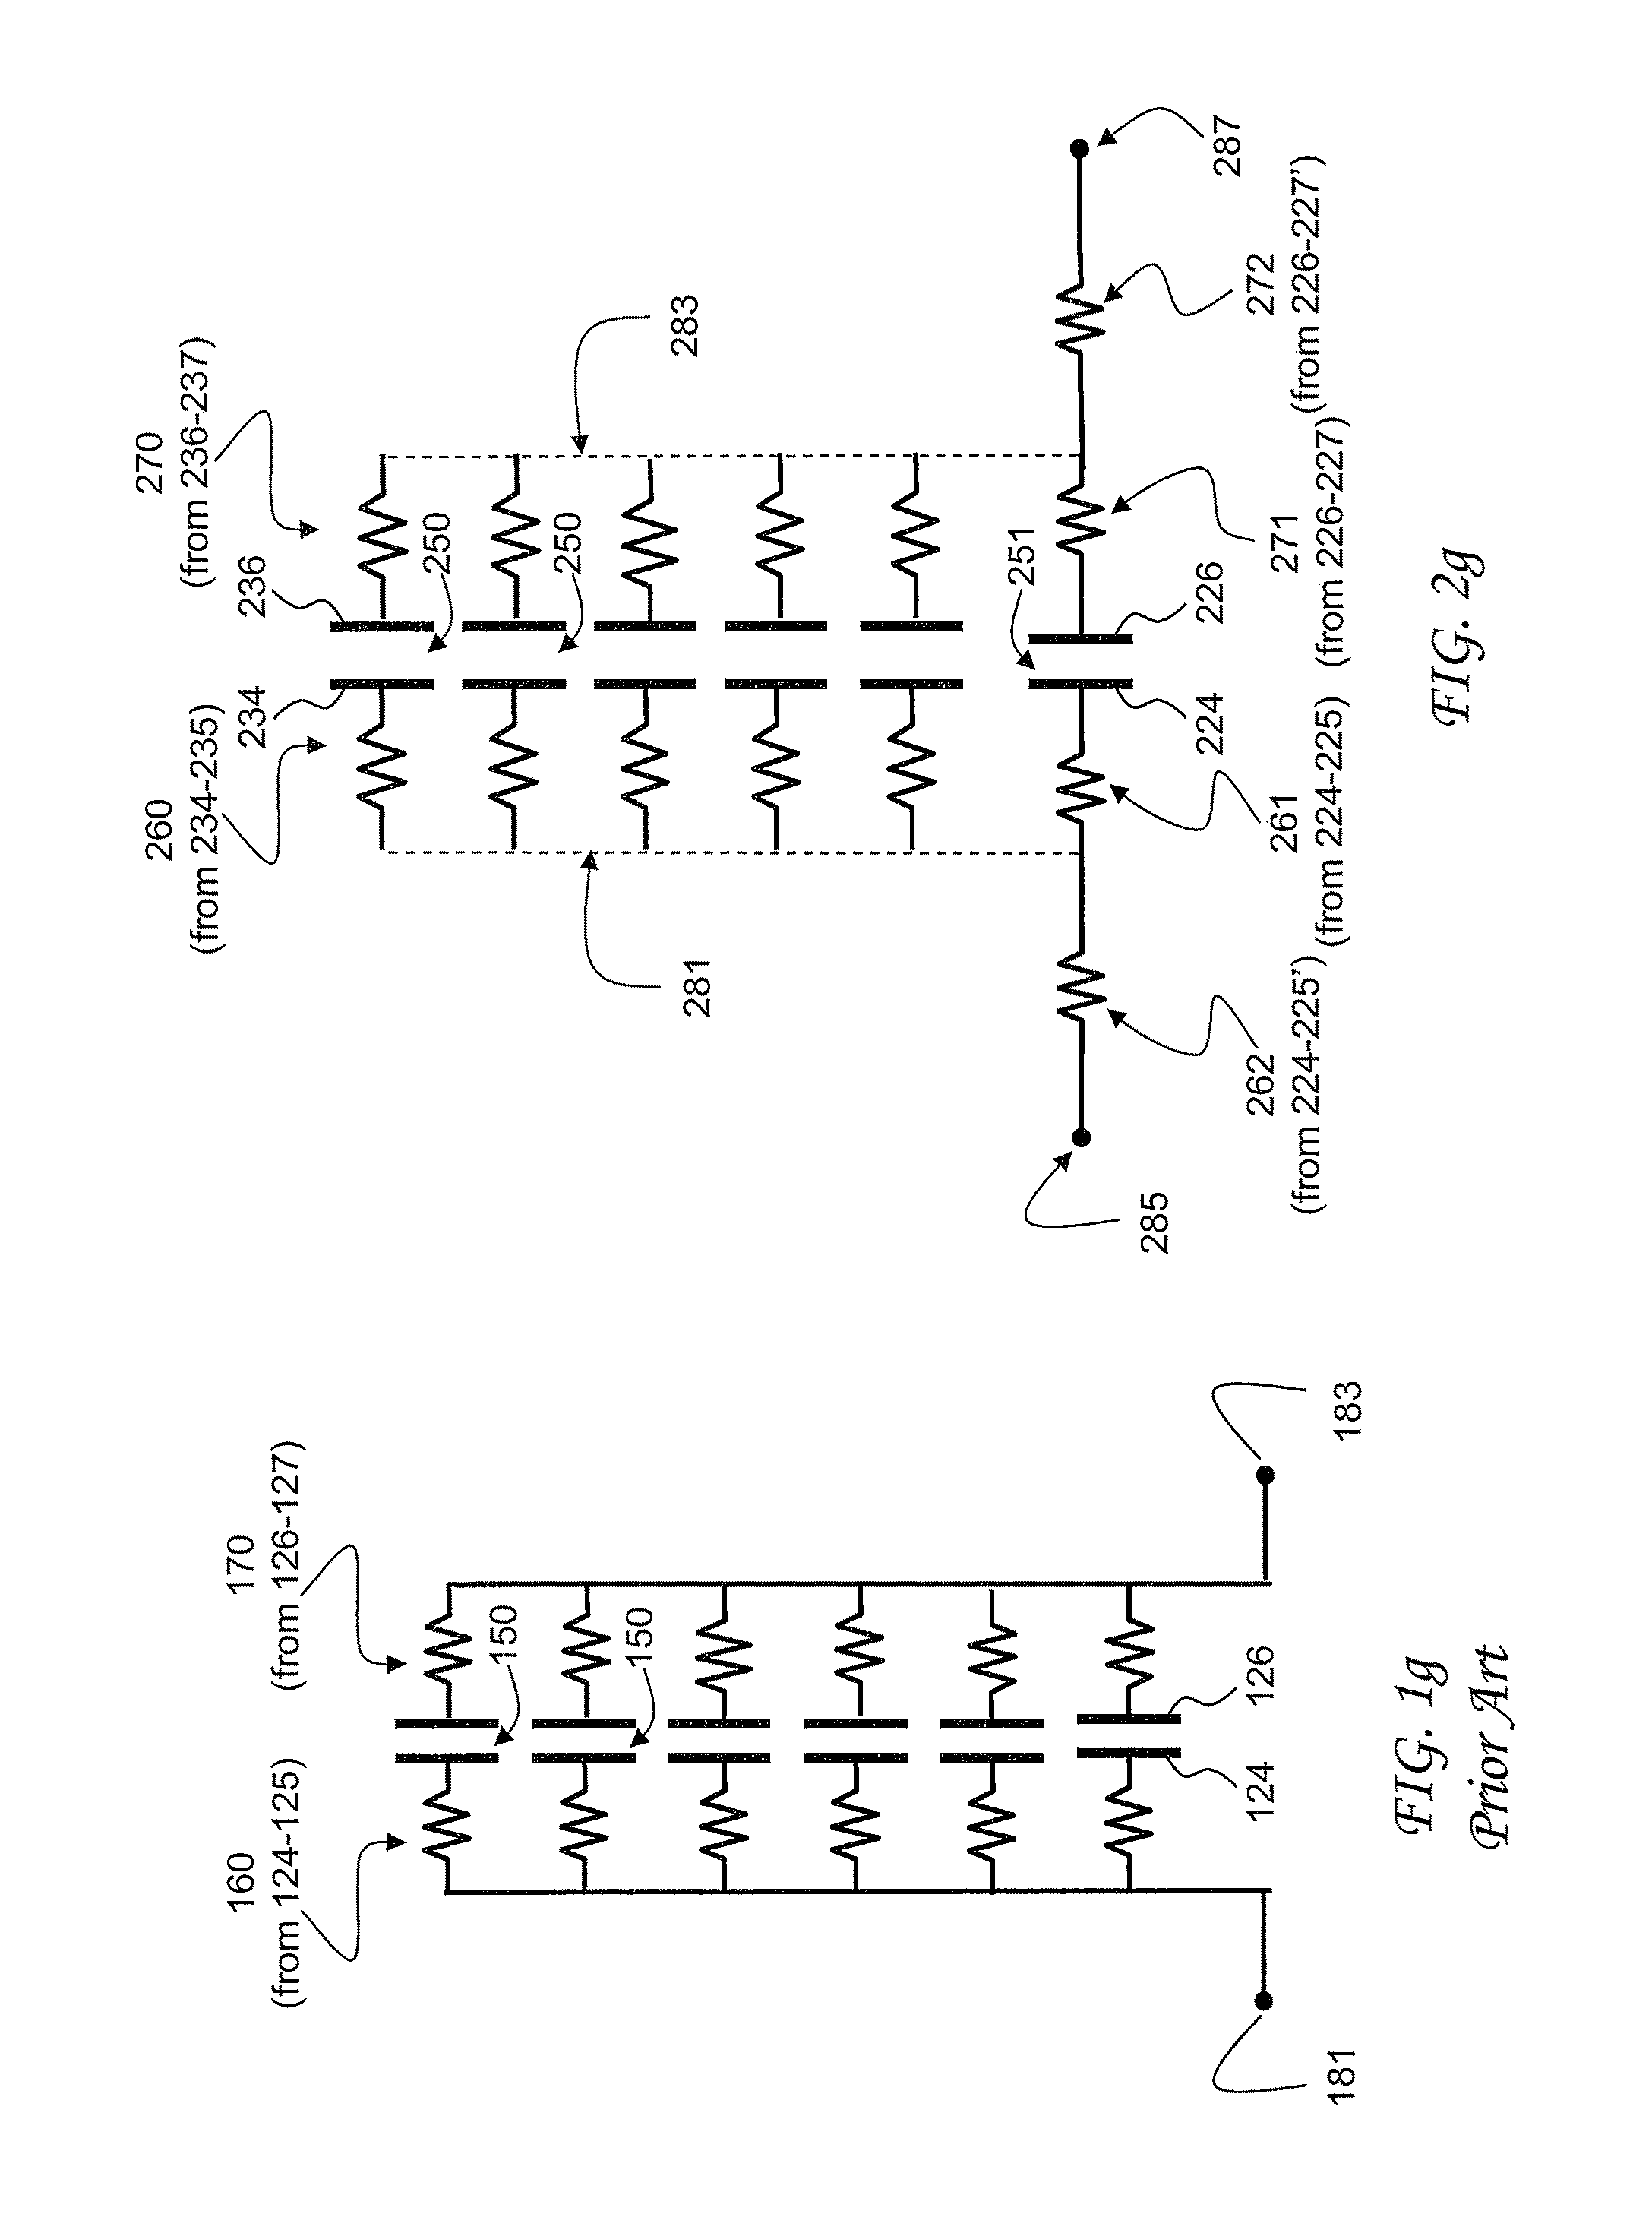 Controlled esr low inductance capacitor